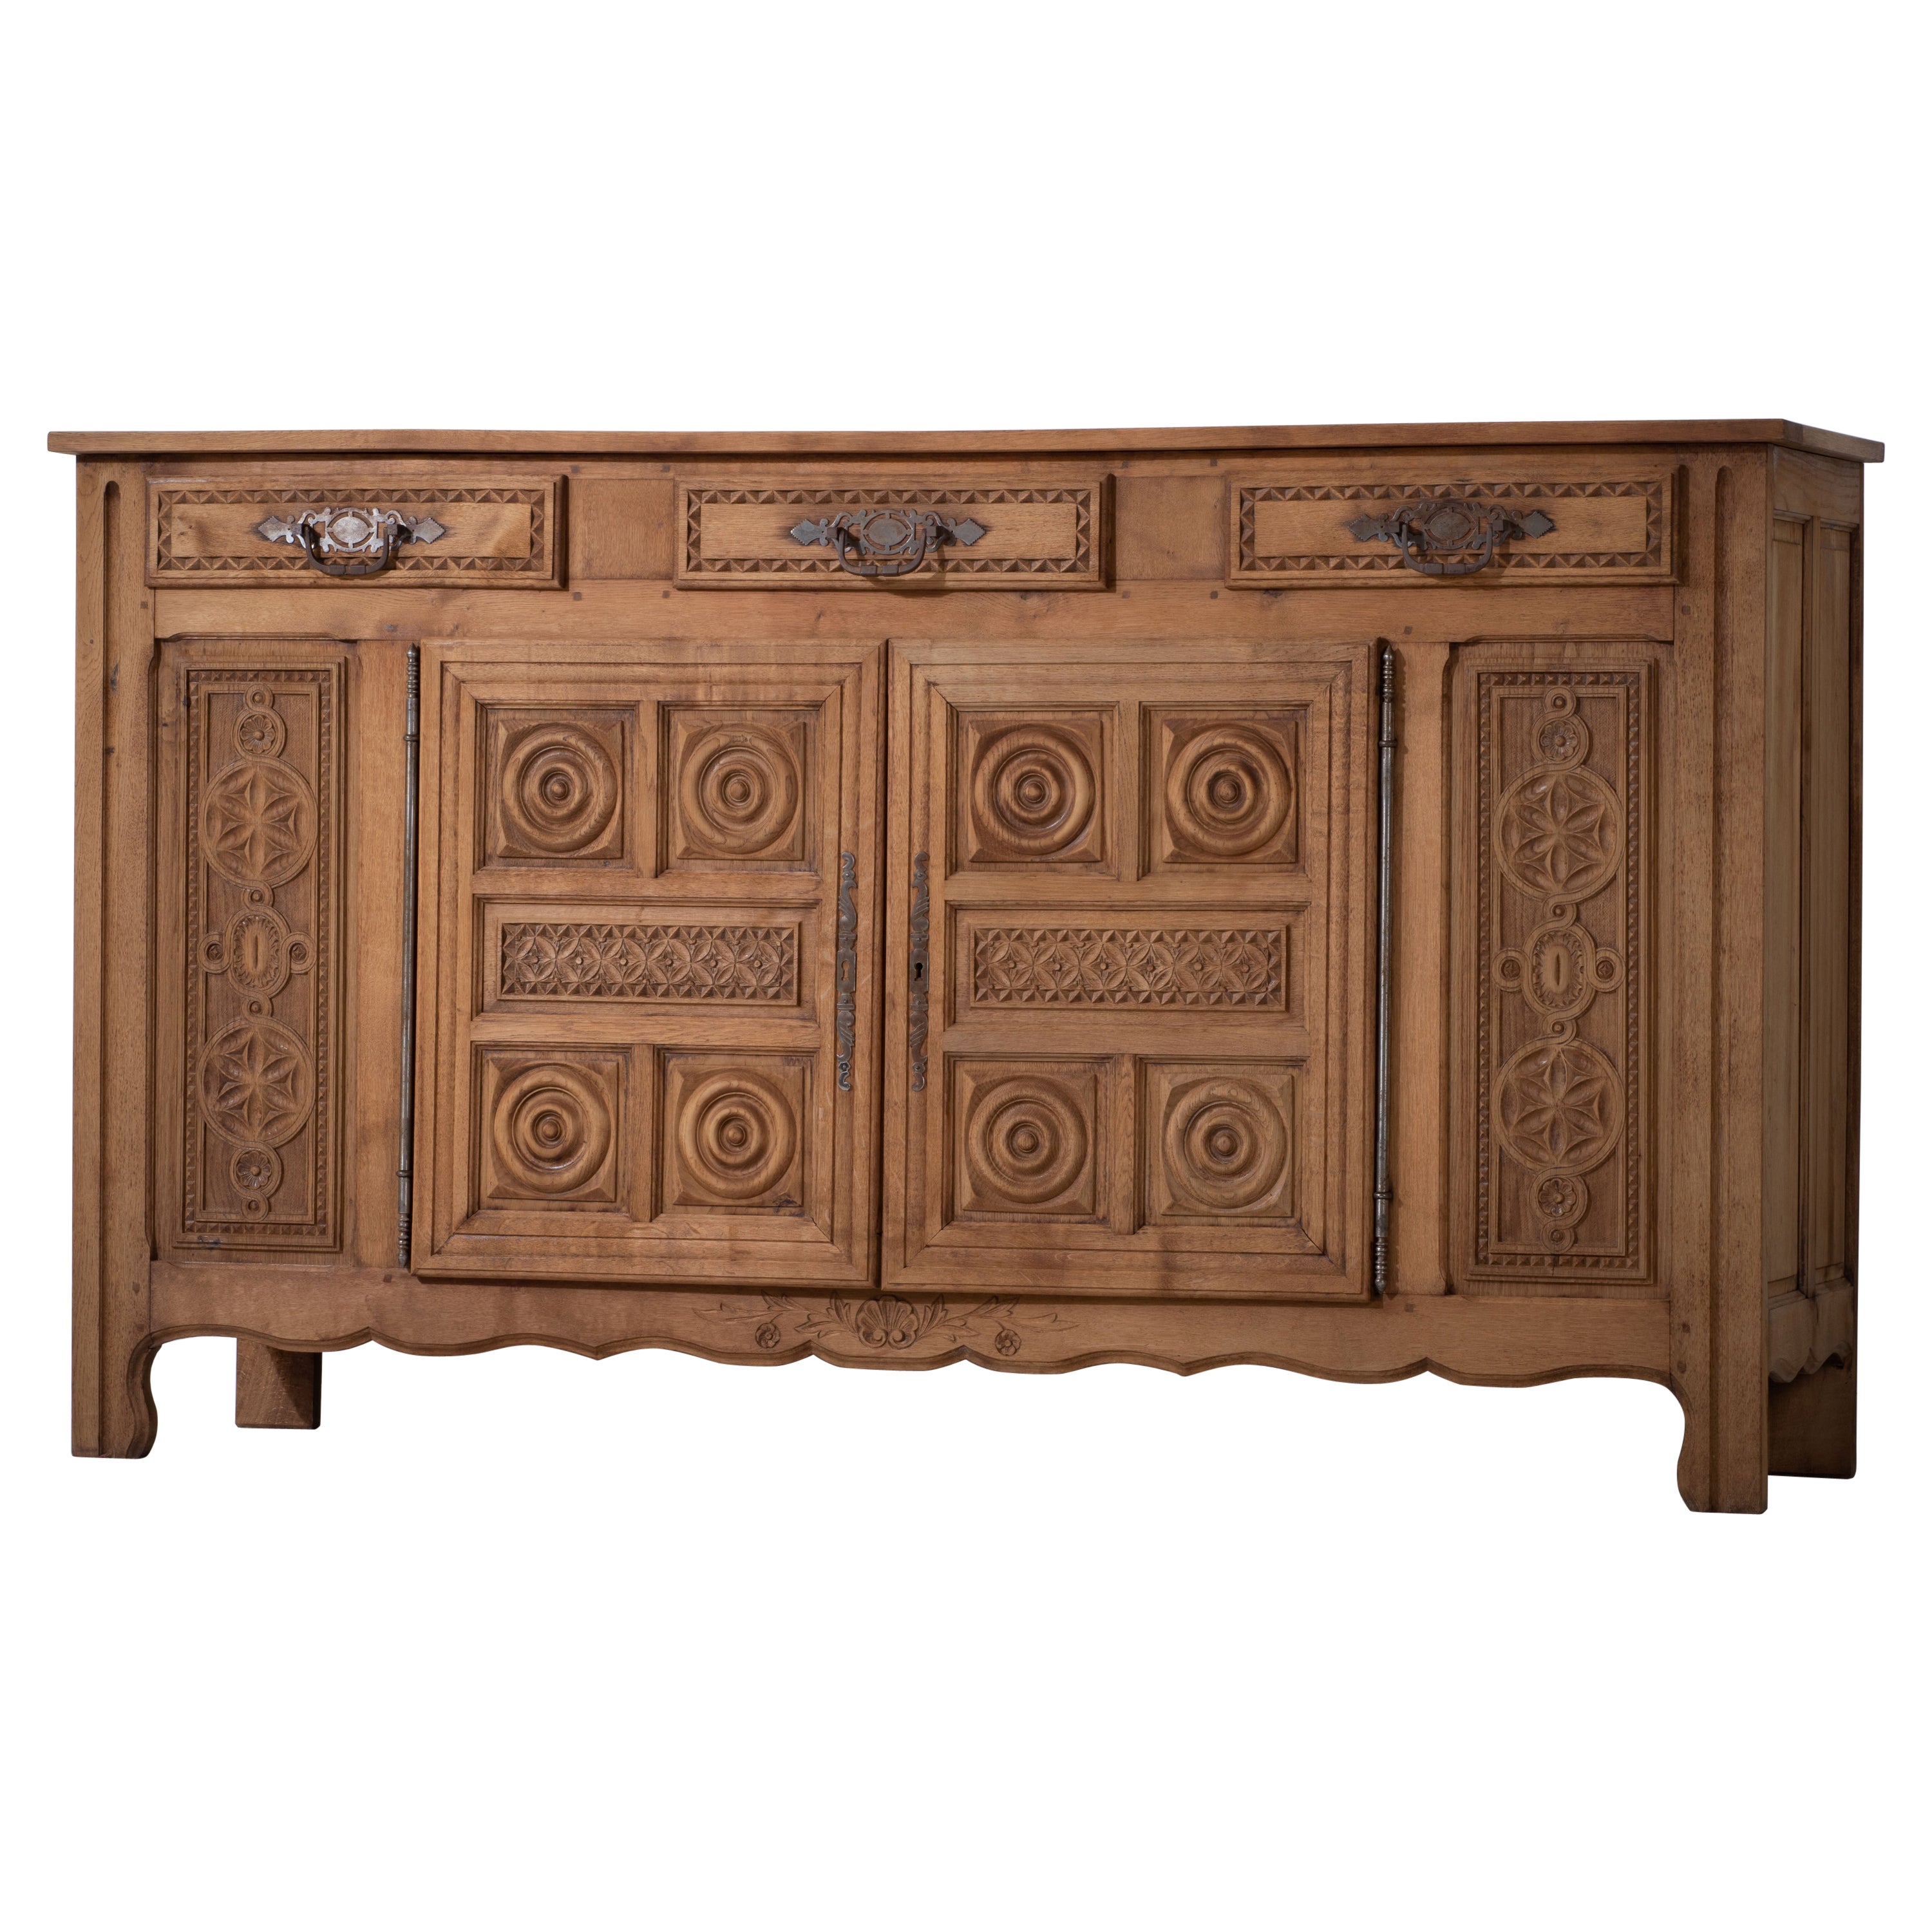 Bleached Solid Oak Credenza with Graphic Details, France, 1940s For Sale